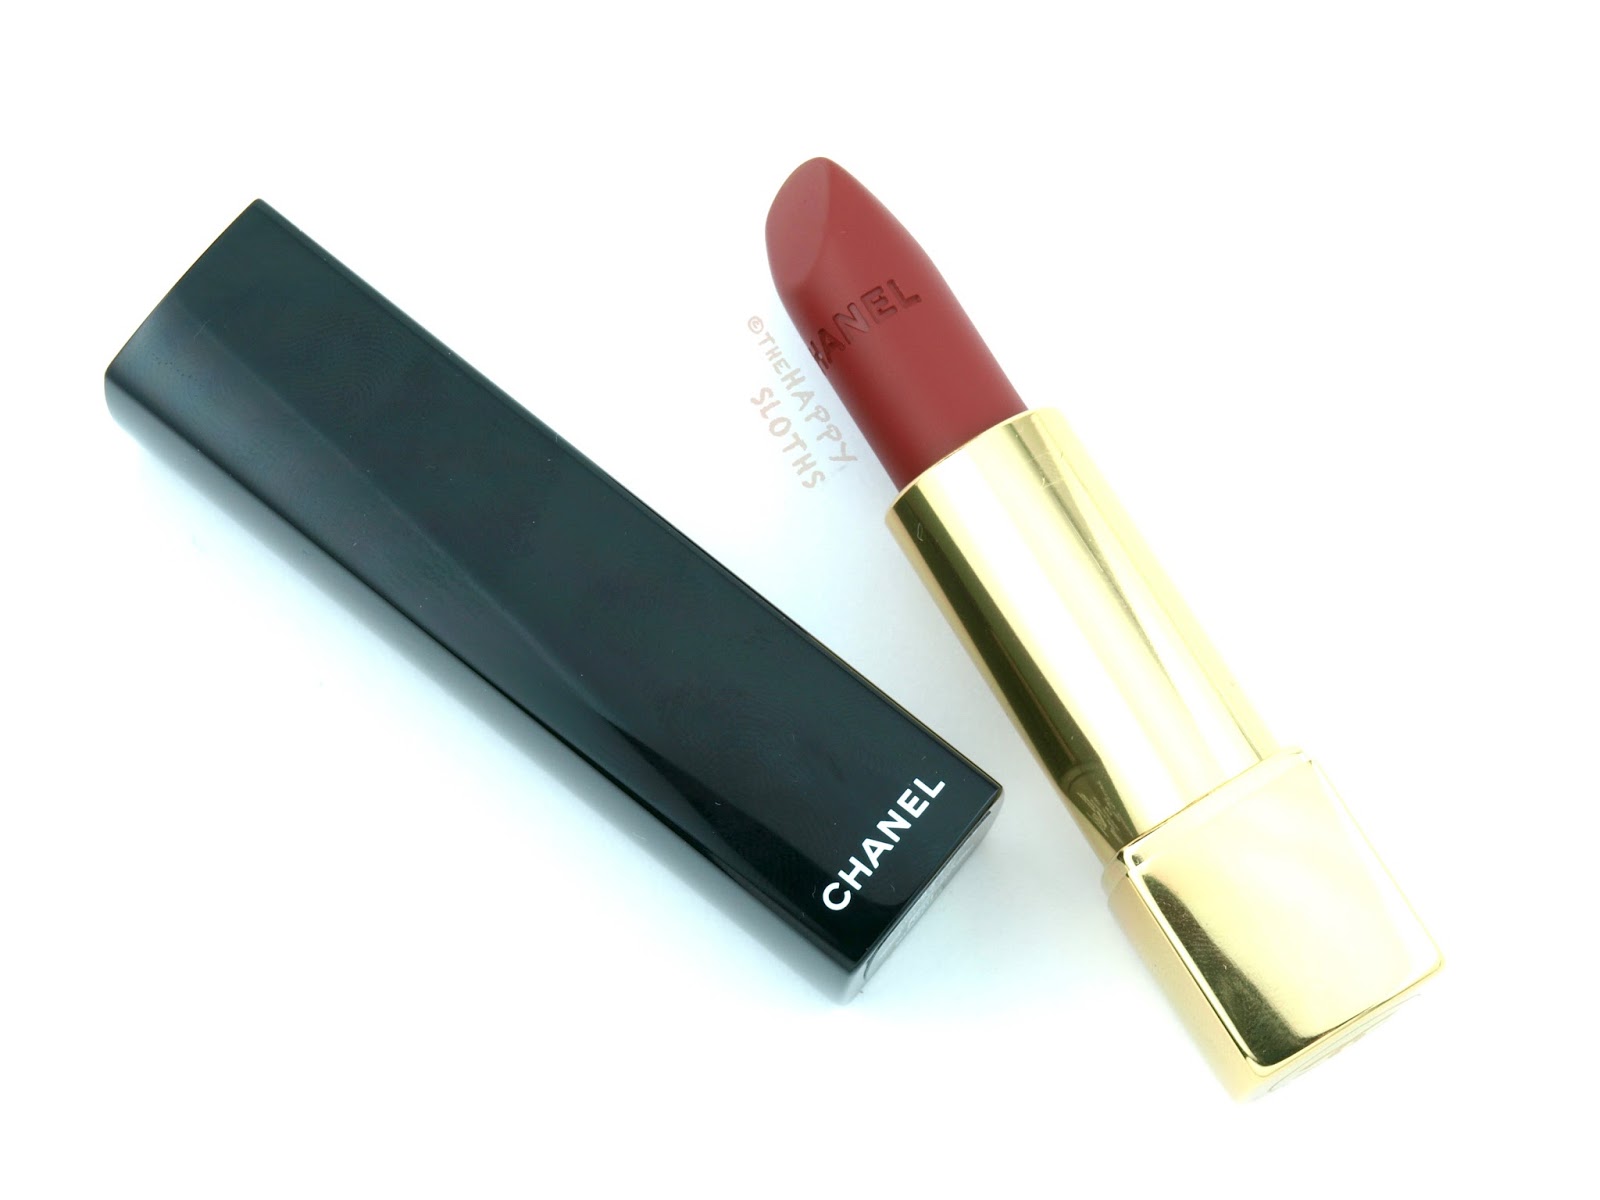 Chanel Fall 2016 Le Rouge N°1 Collection, 58 Rouge Vie Rouge Allure  Velvet Lipstick: Review and Swatches